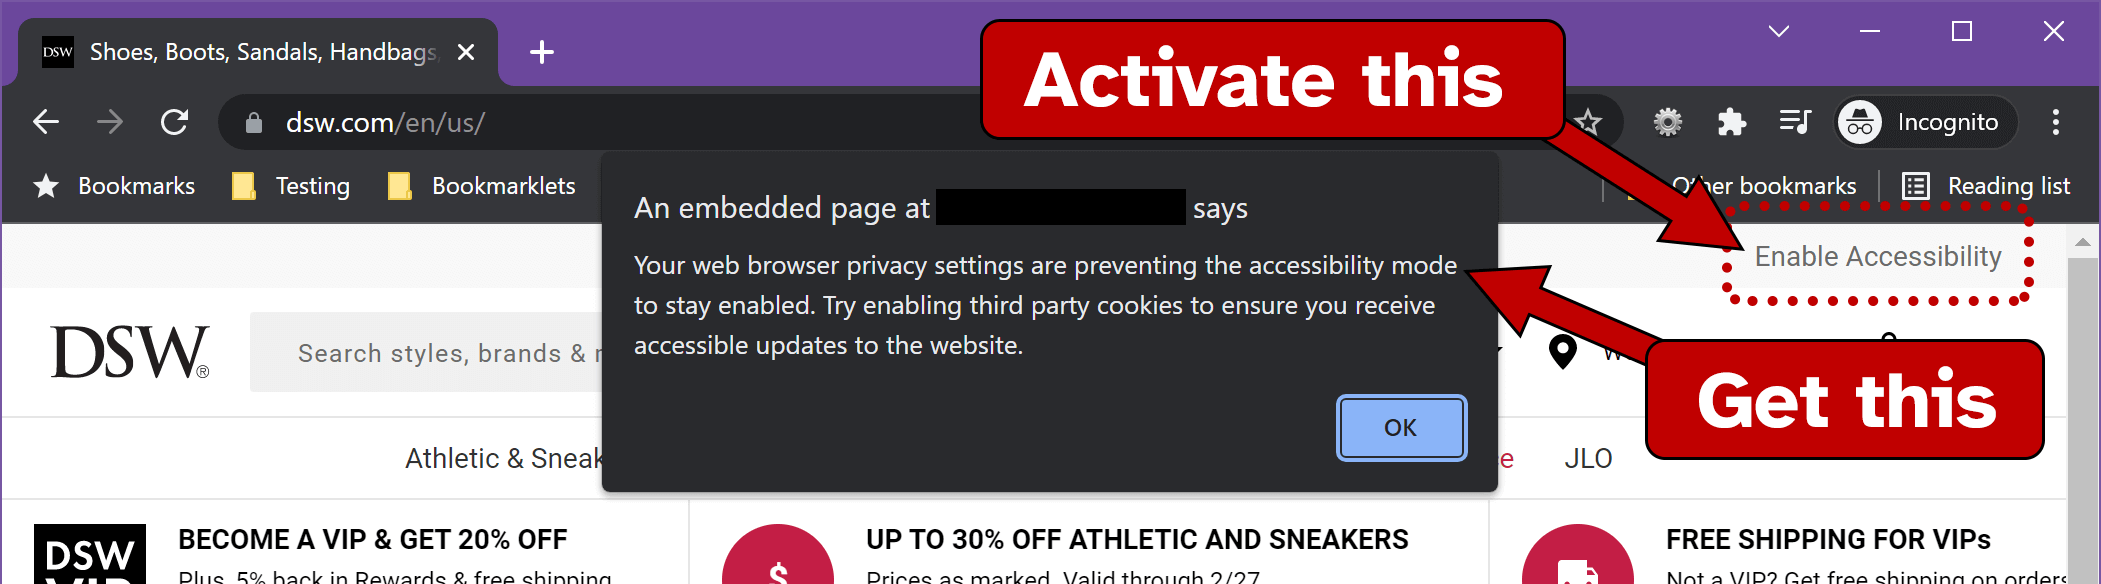 Browser alert on the DSW site: An embedded page at REDACTED says: Your web browser privacy settings are preventing the accessibility mode to stay enabled. Try enabling third party cookies to ensure you receive accessible updates to the website.